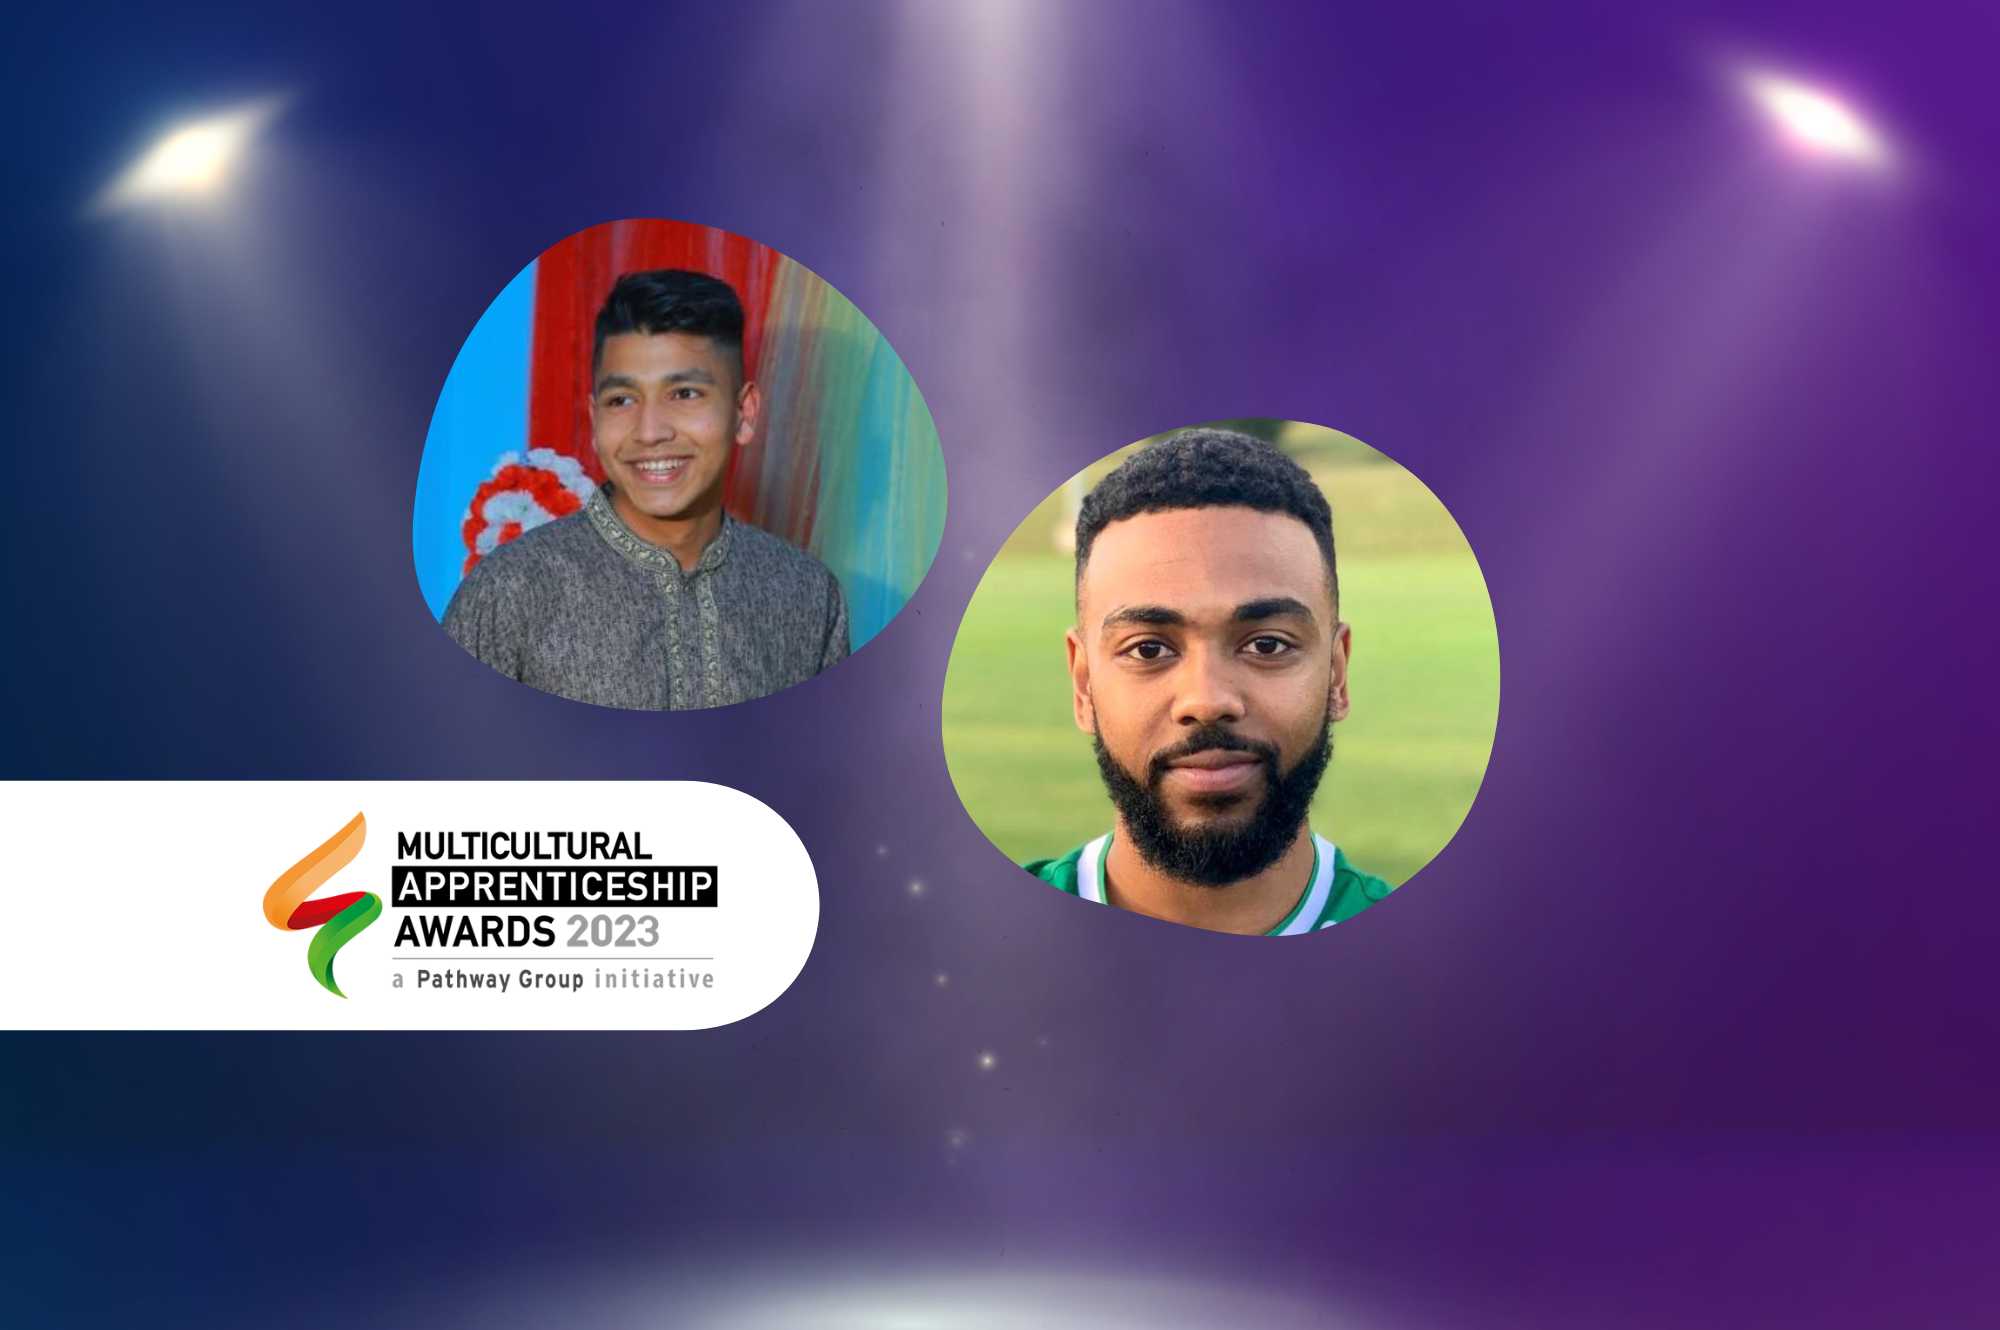 JTL and its apprentices shortlisted at the Multicultural Apprenticeship Awards